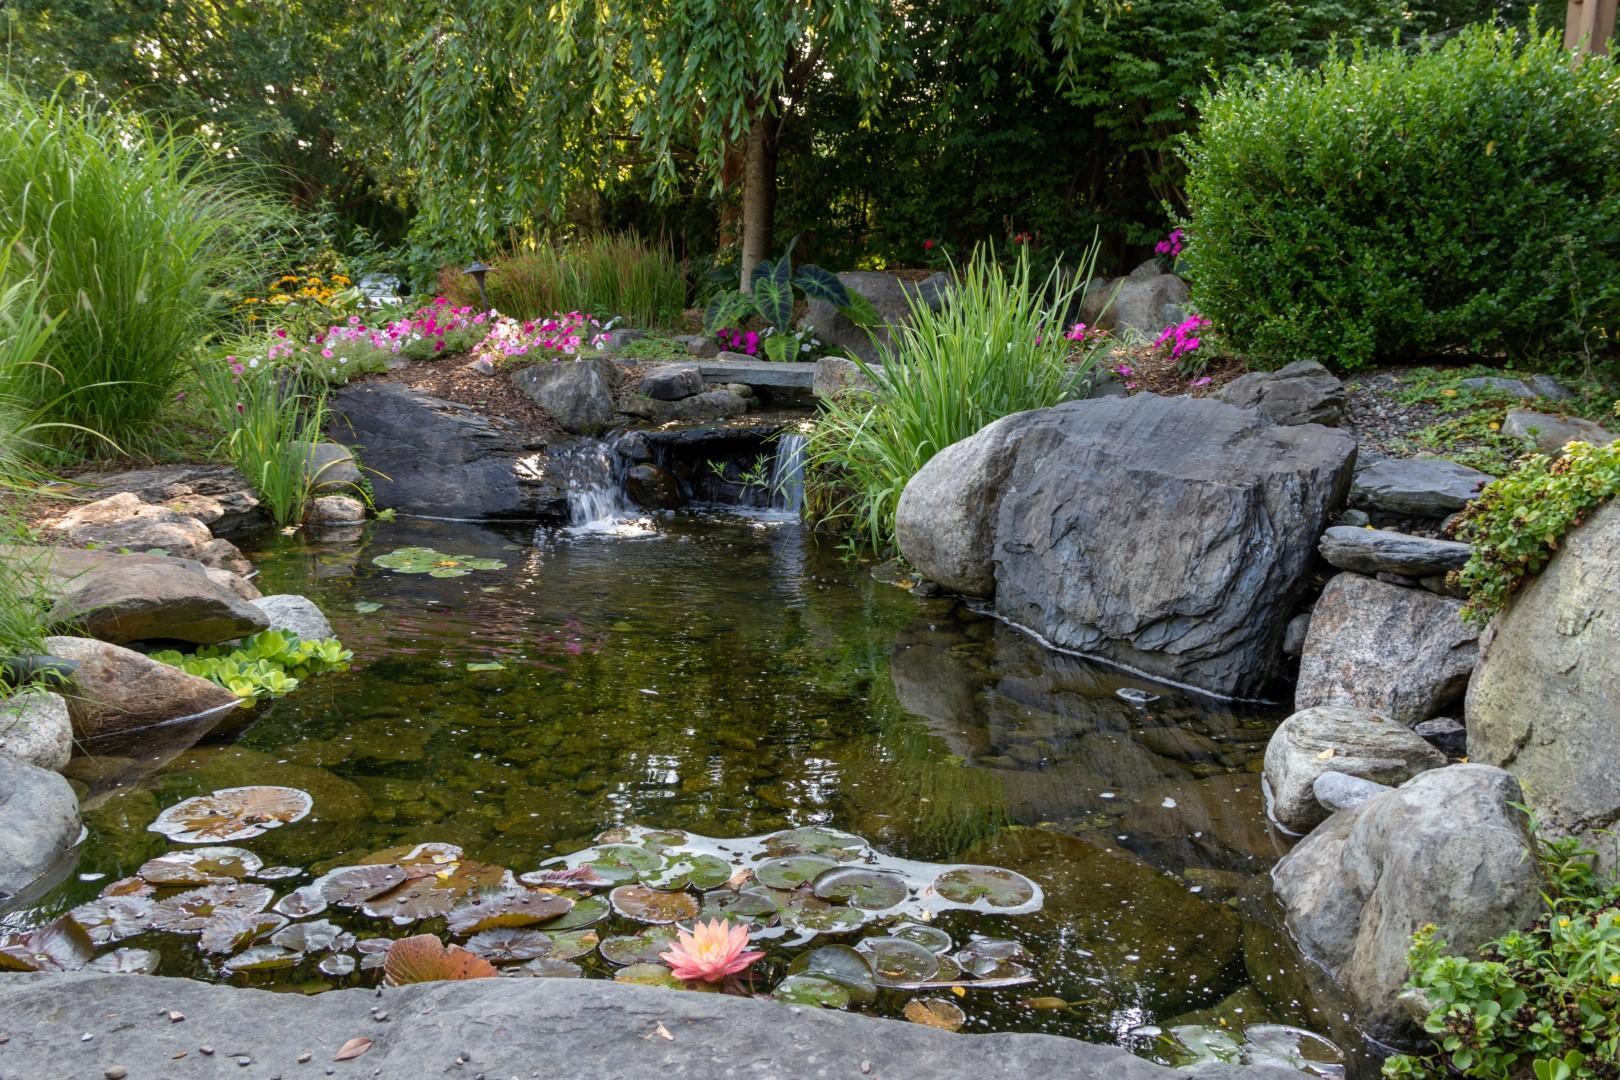 Landscape,Architecture,For,Spring,And,Summer,Garden,Featuring,Koi,Pond